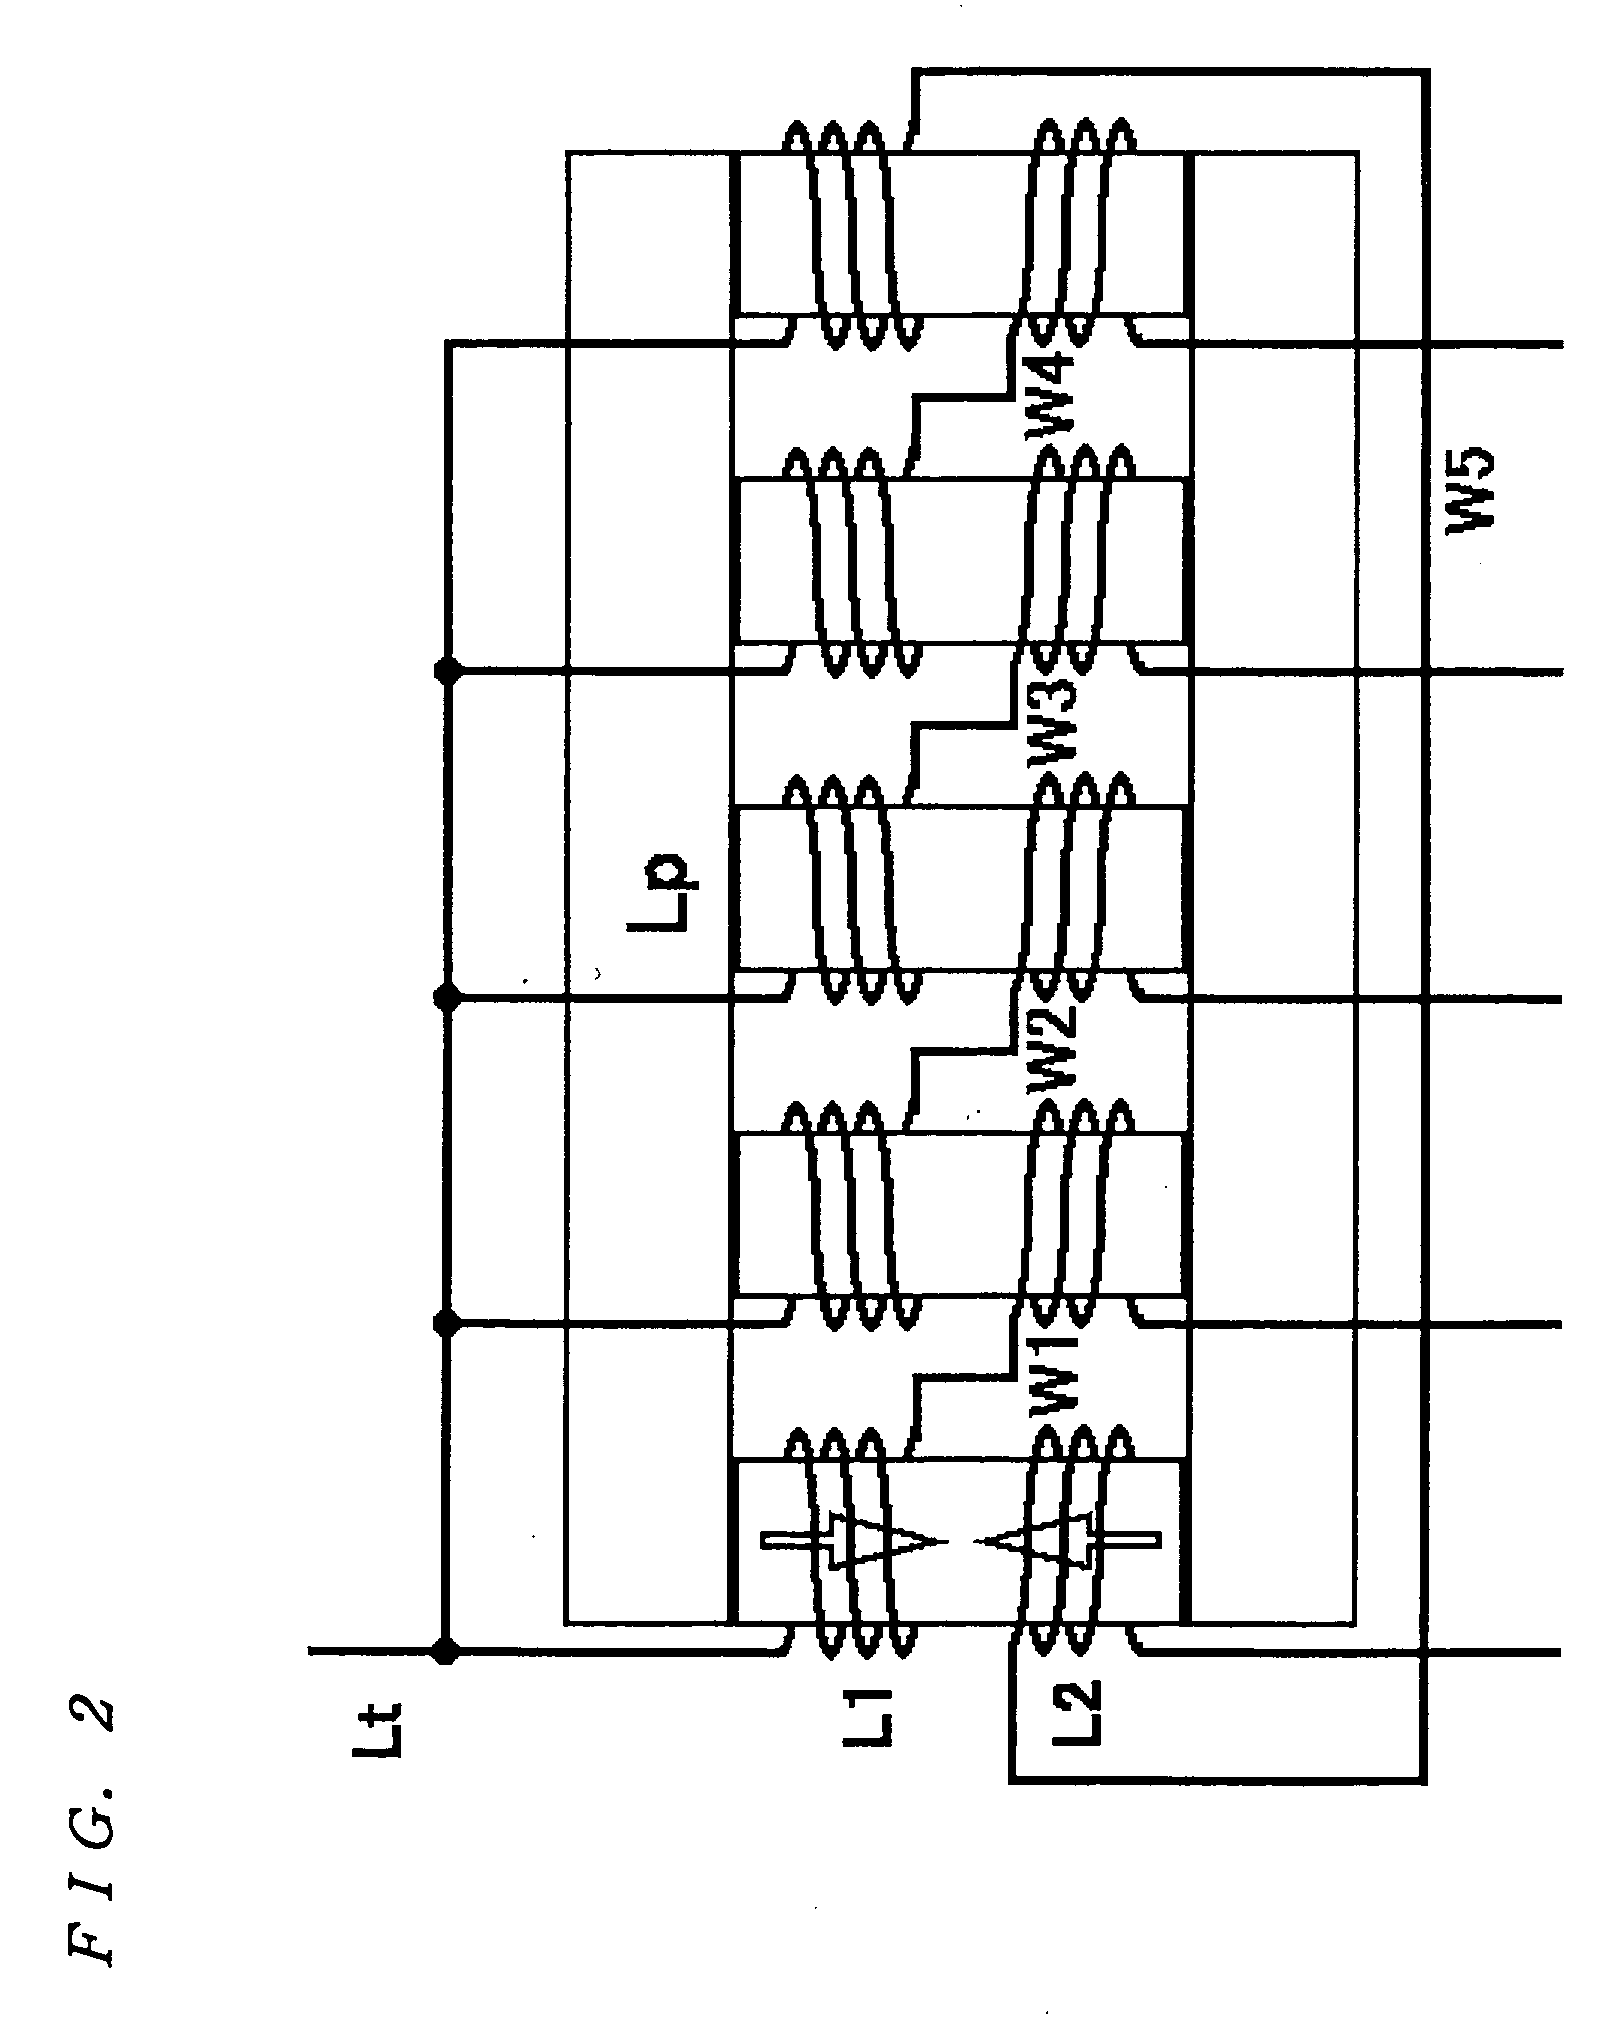 Module for parallel lighting and balancer coil for discharge lamp